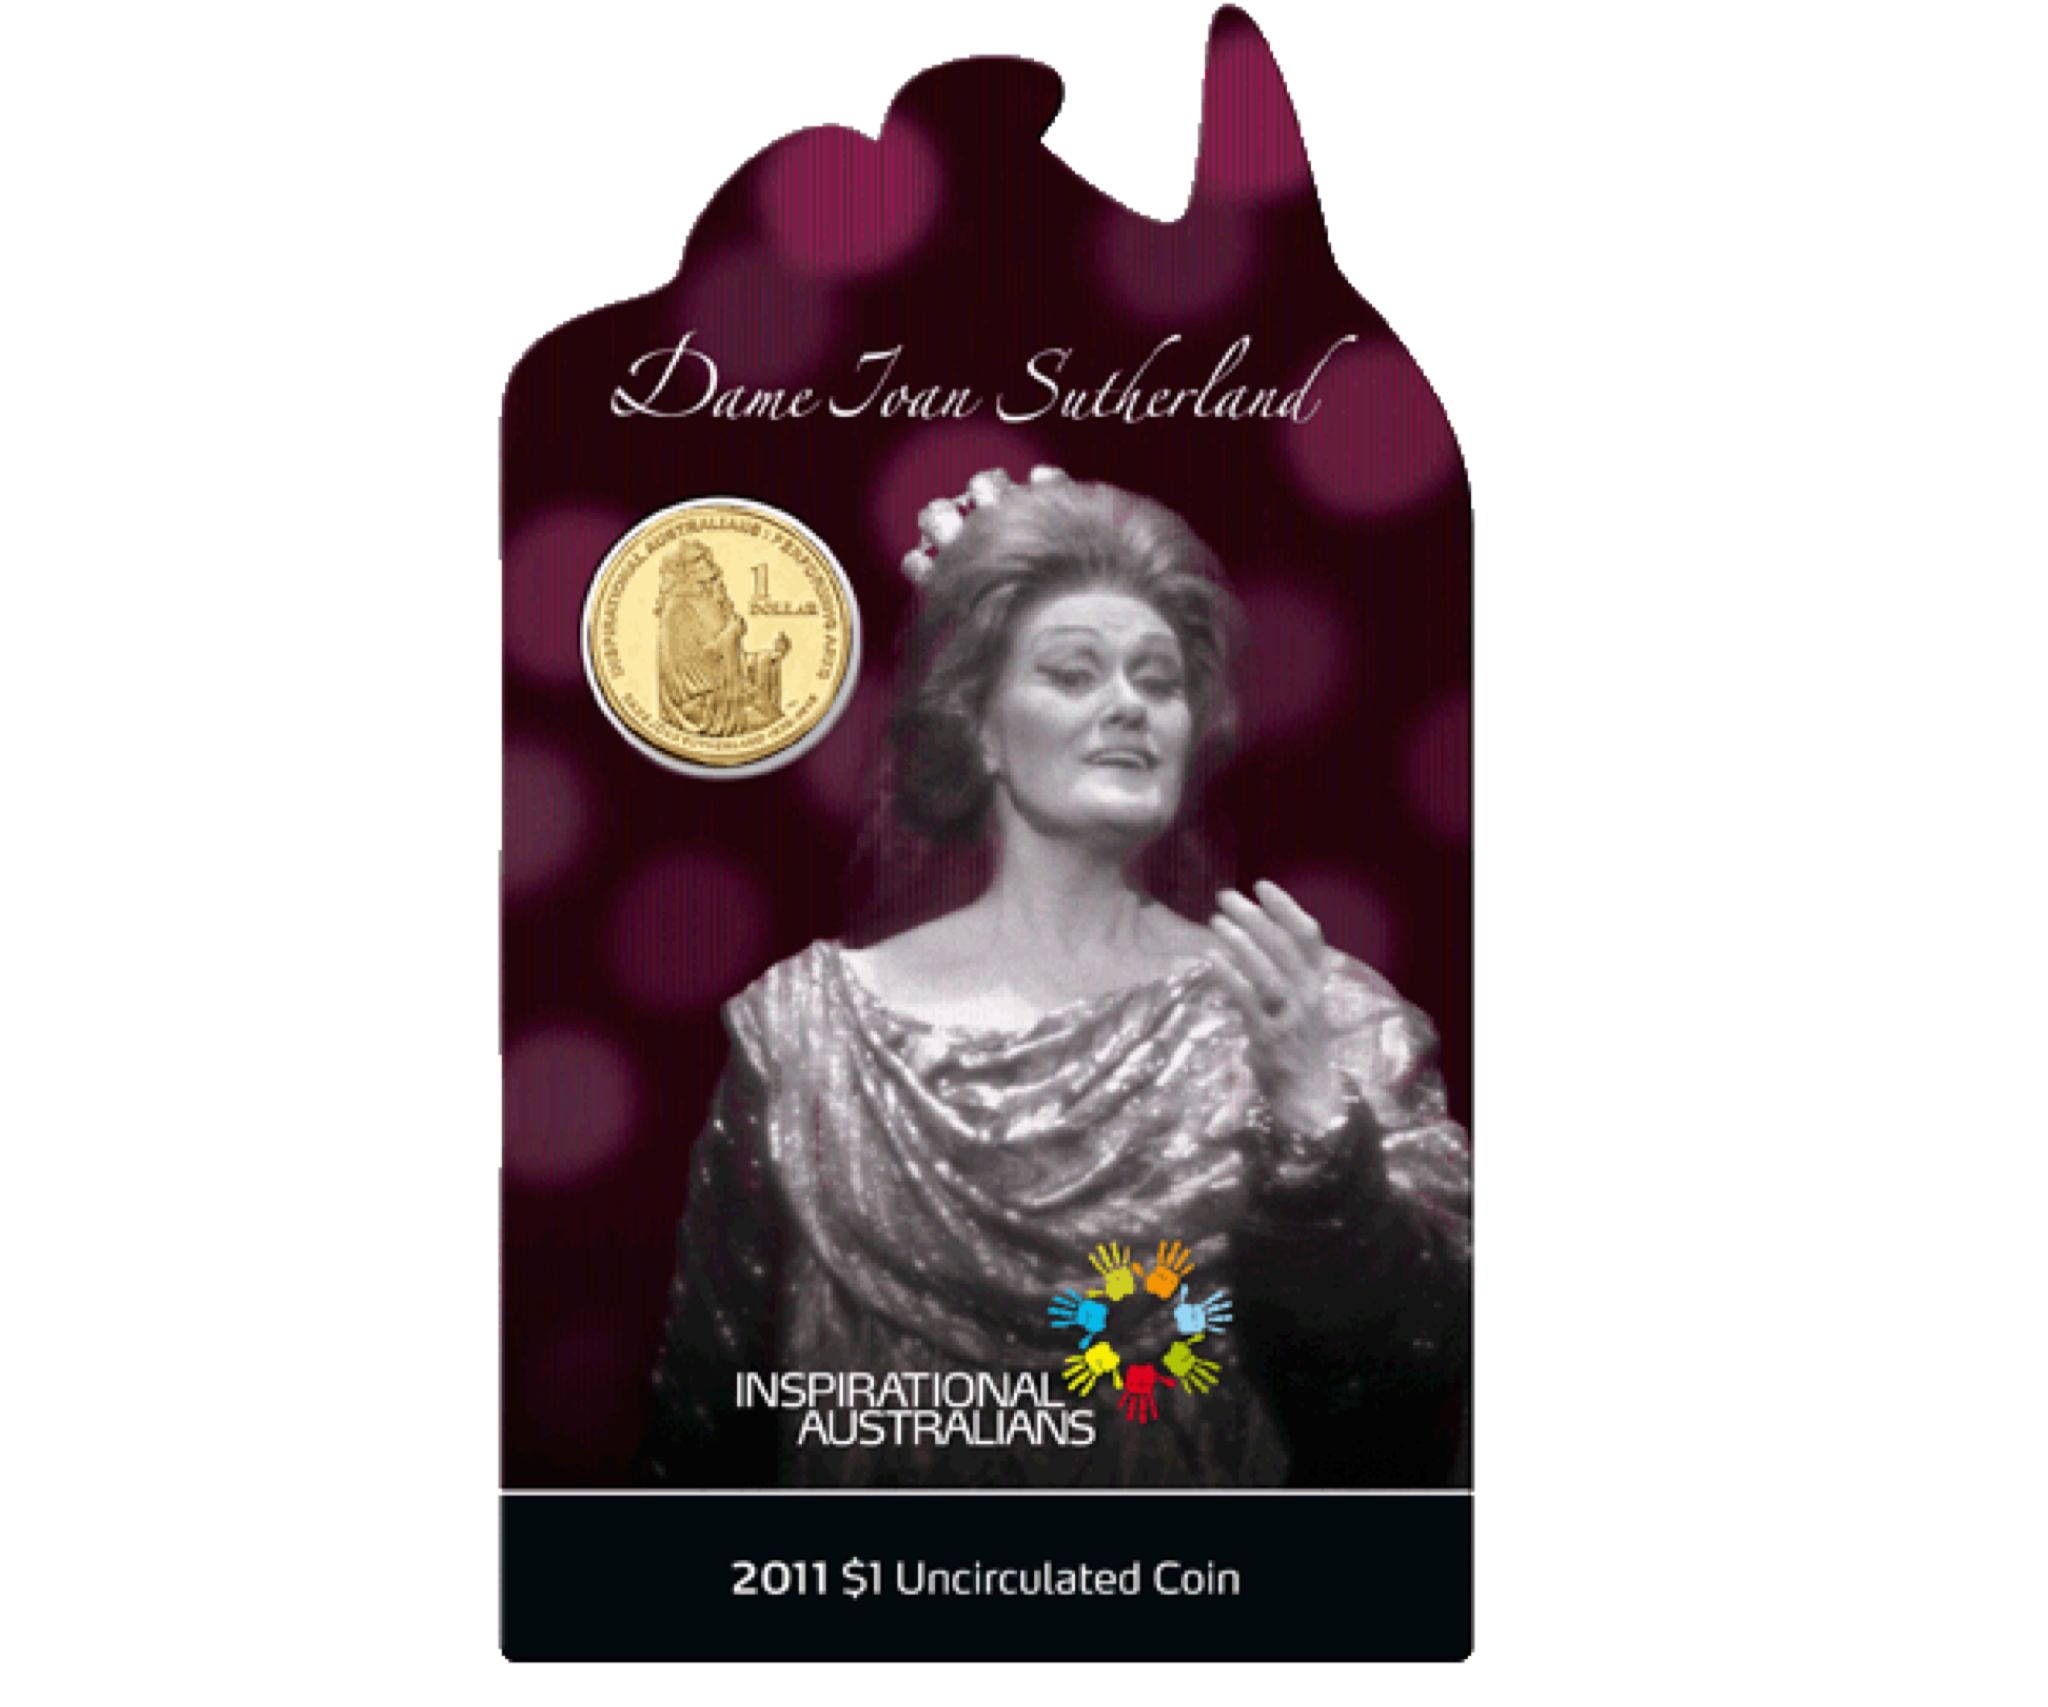 2011 $1 Uncirculated Inspirational Australians - Dame Joan Sutherland  coin collectible [Barcode 9314683100744] - Main Image 1